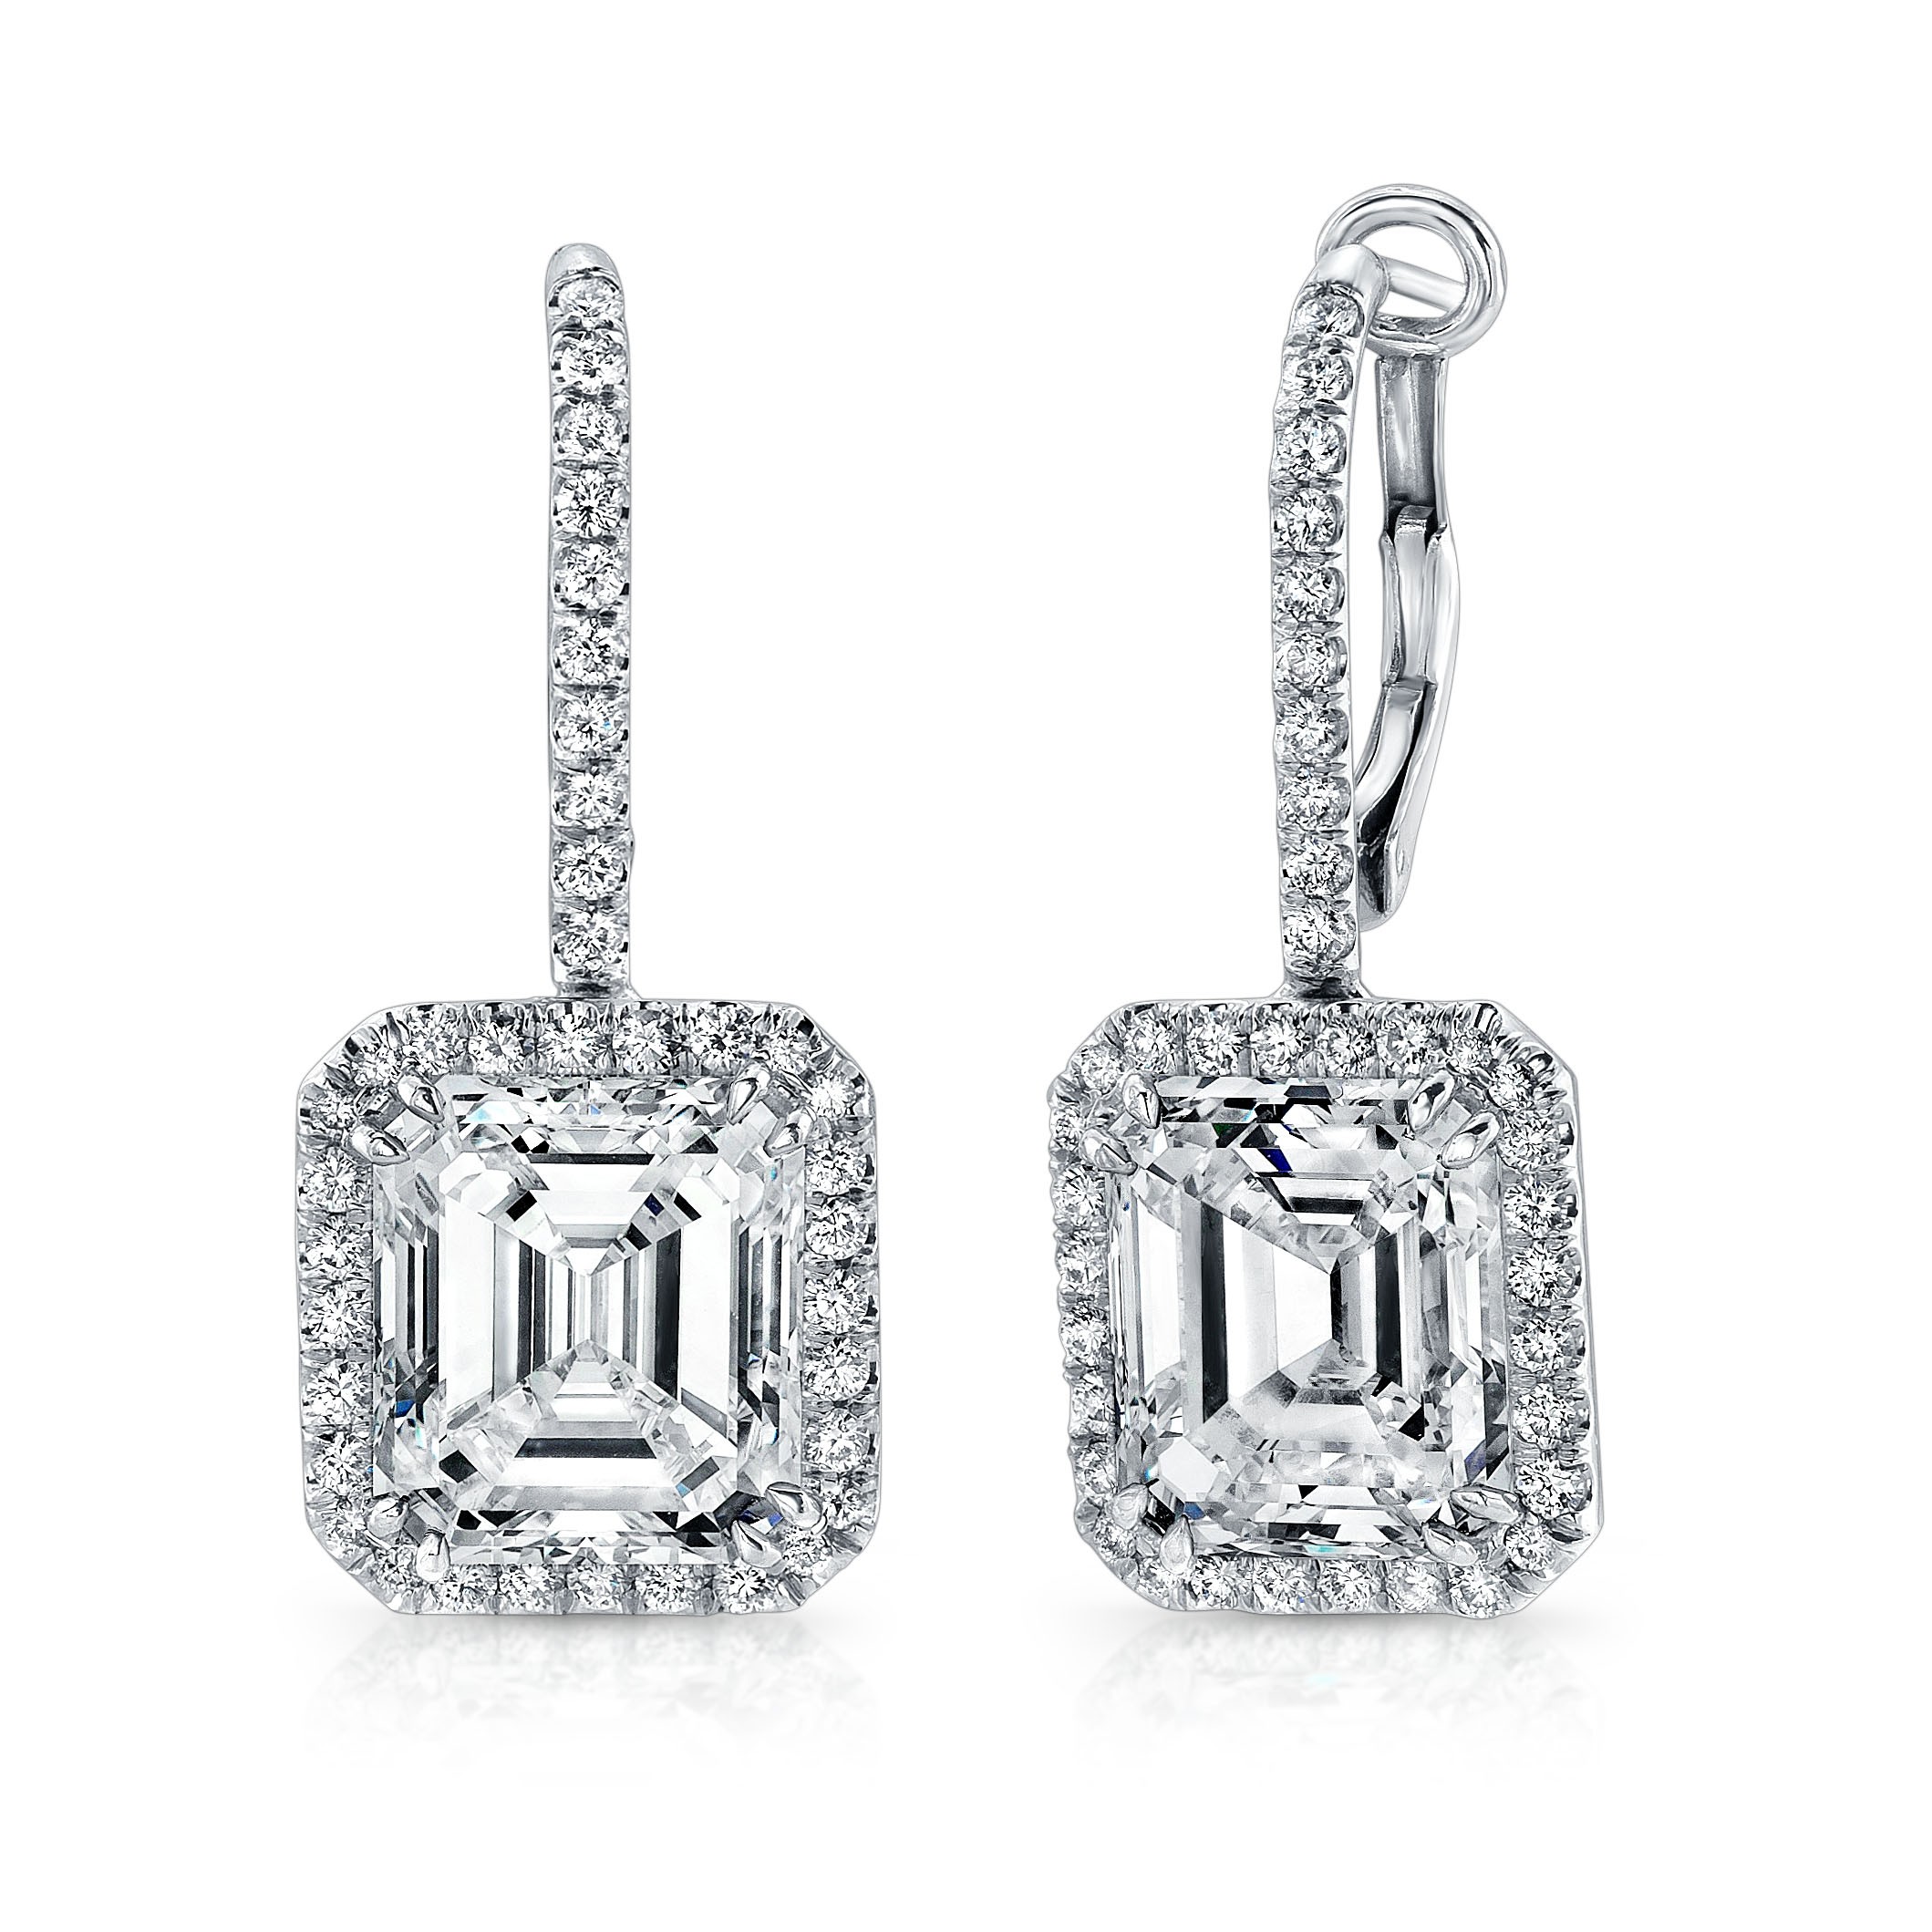 Diamond Jewelry in Palm Desert and Palm Springs area | Leeds and Son